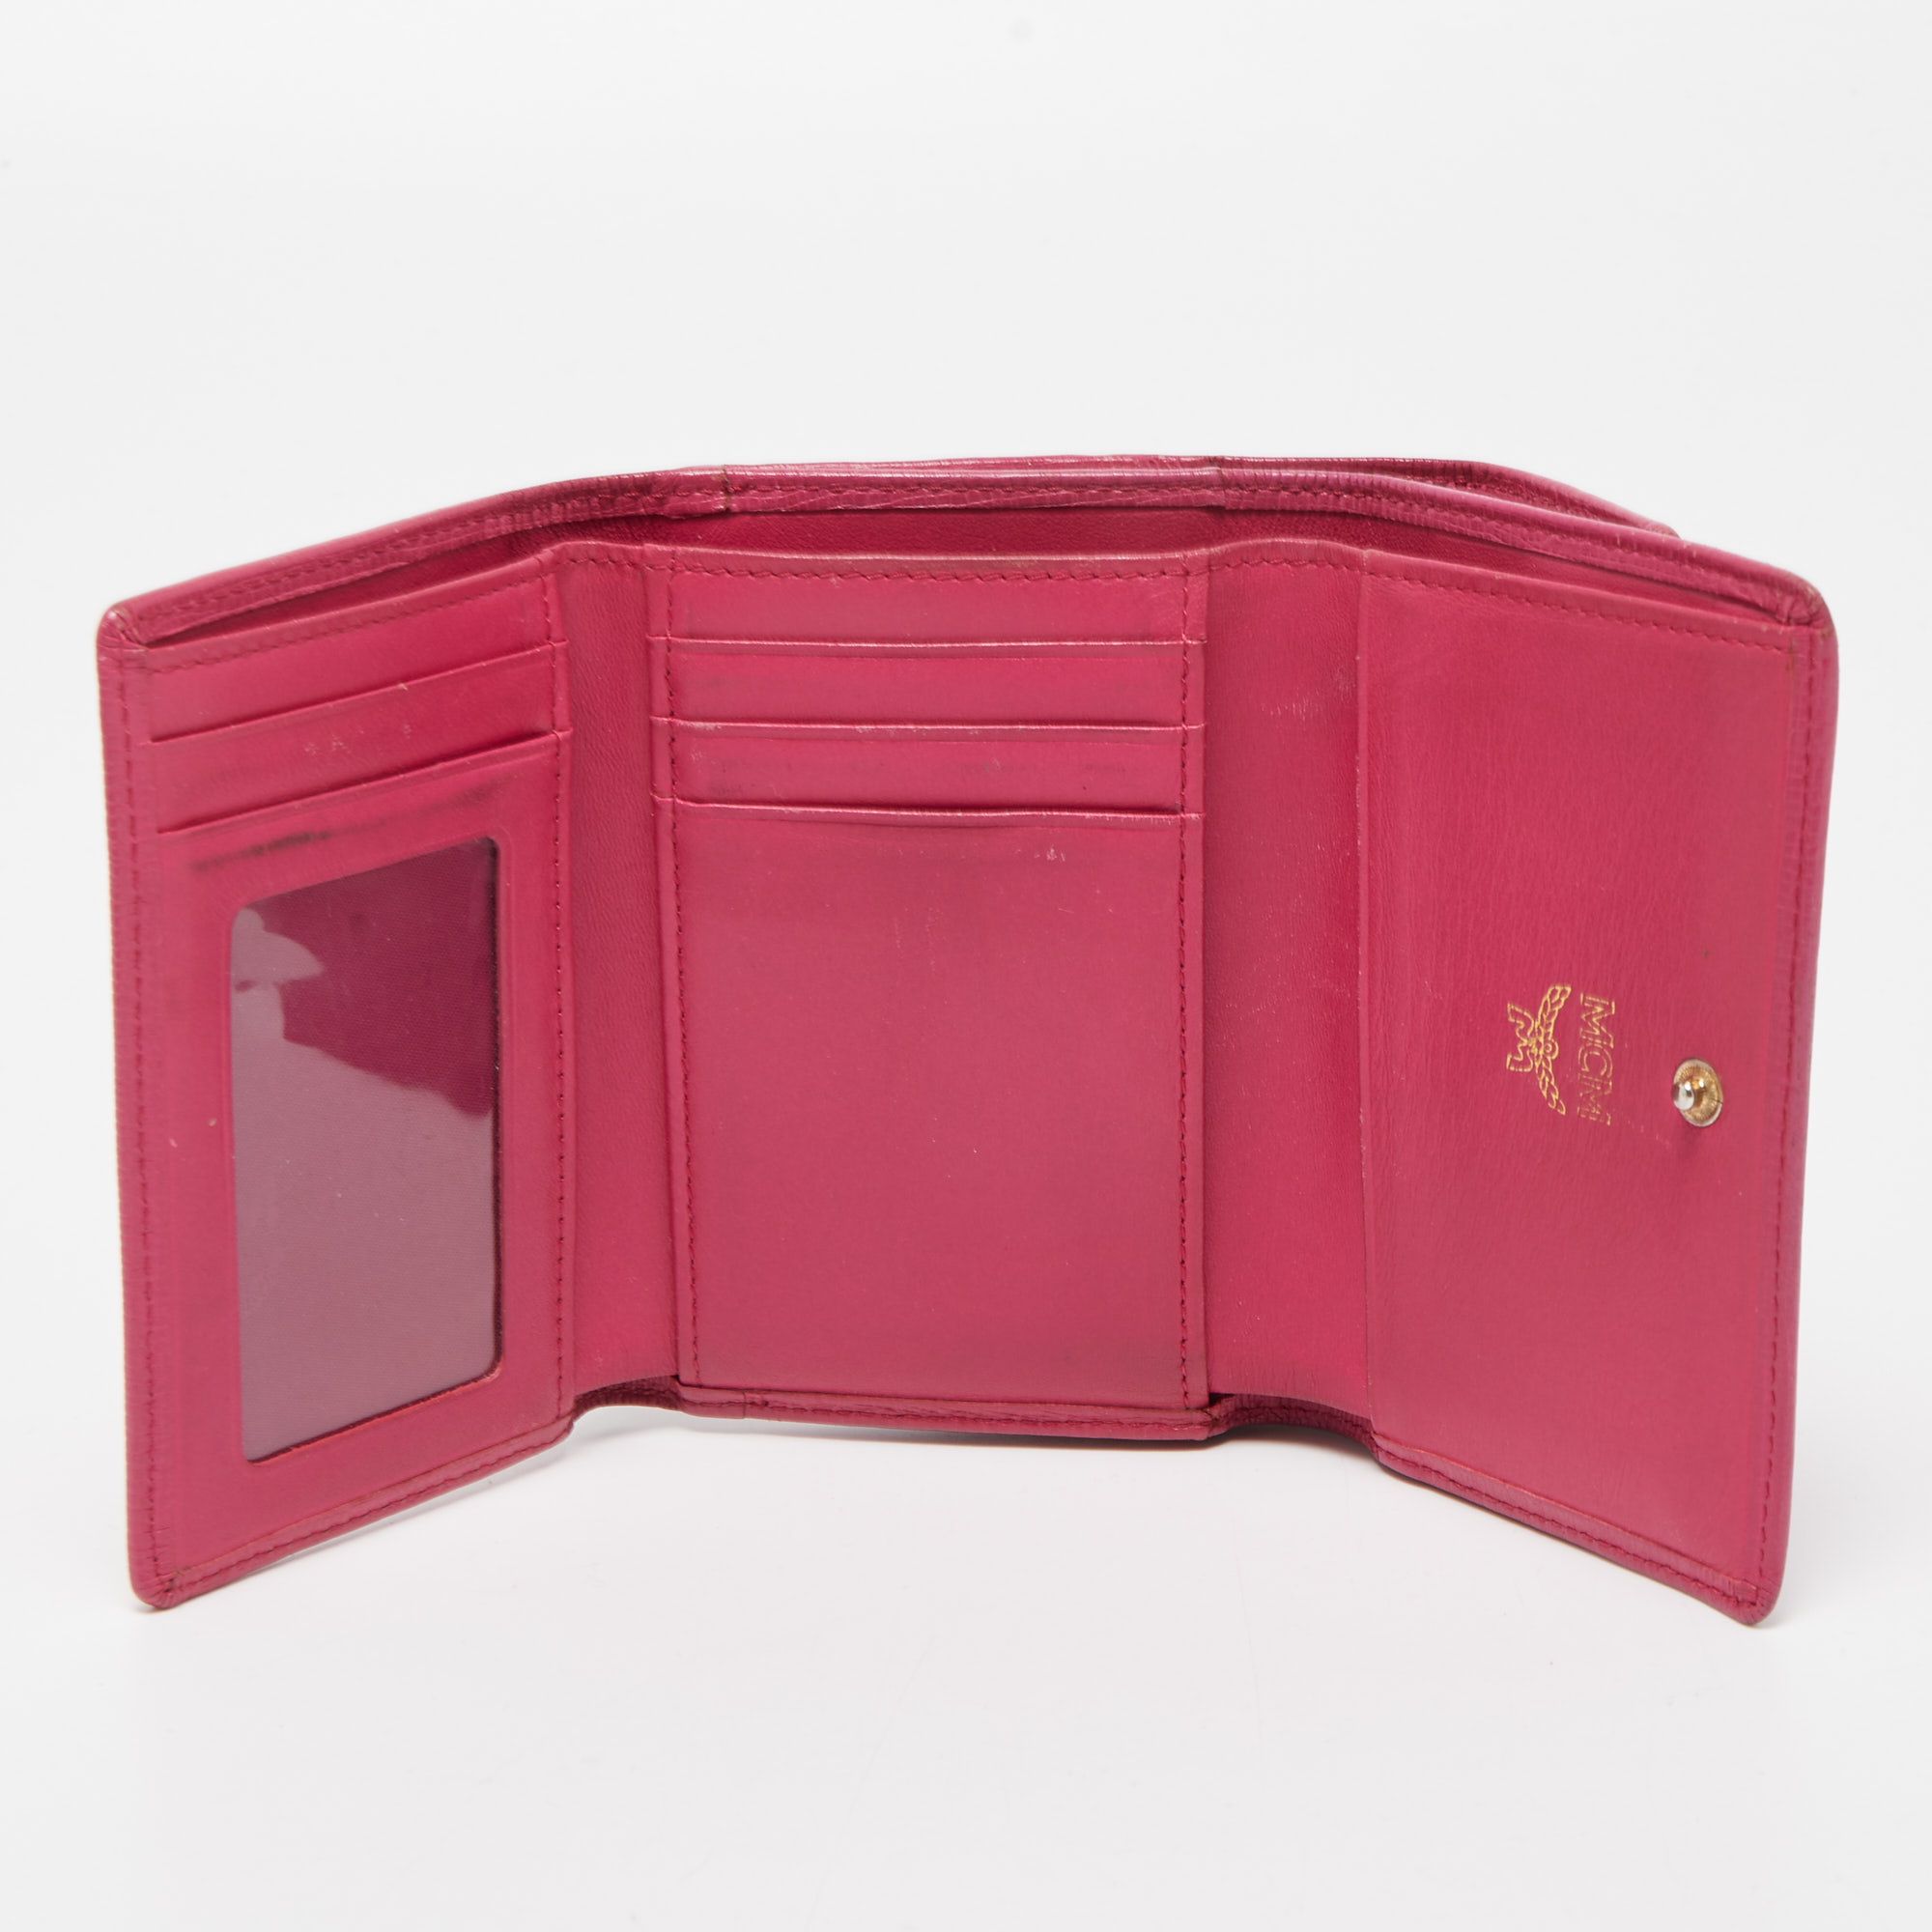 MCM Pink Leather Studded Charm Trifold Wallet